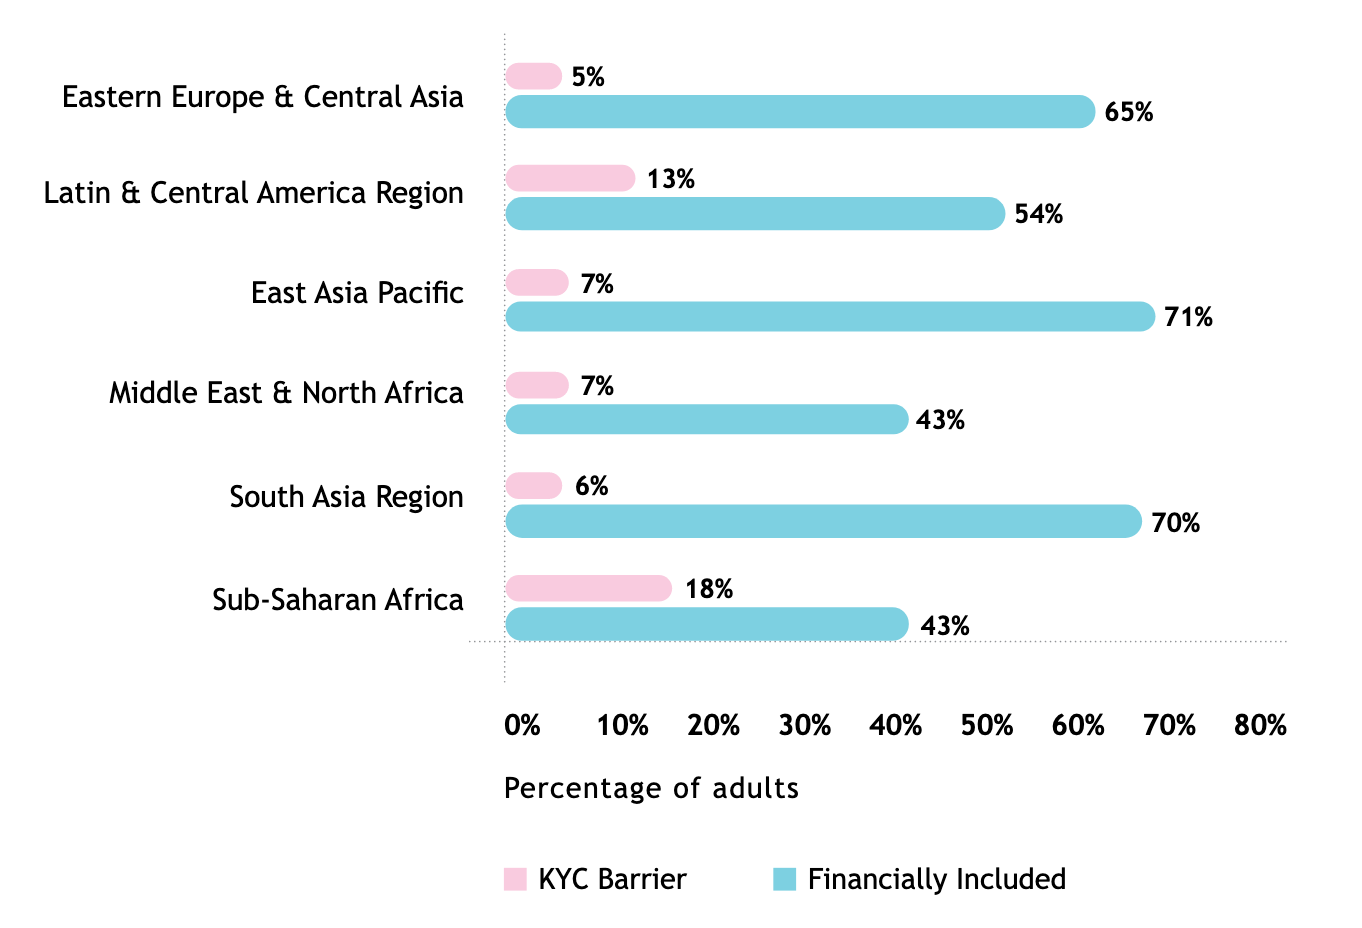 A graphic displaying the percentage of financially included adults and the percentage of adults experiencing KYC barriers to access by global region.